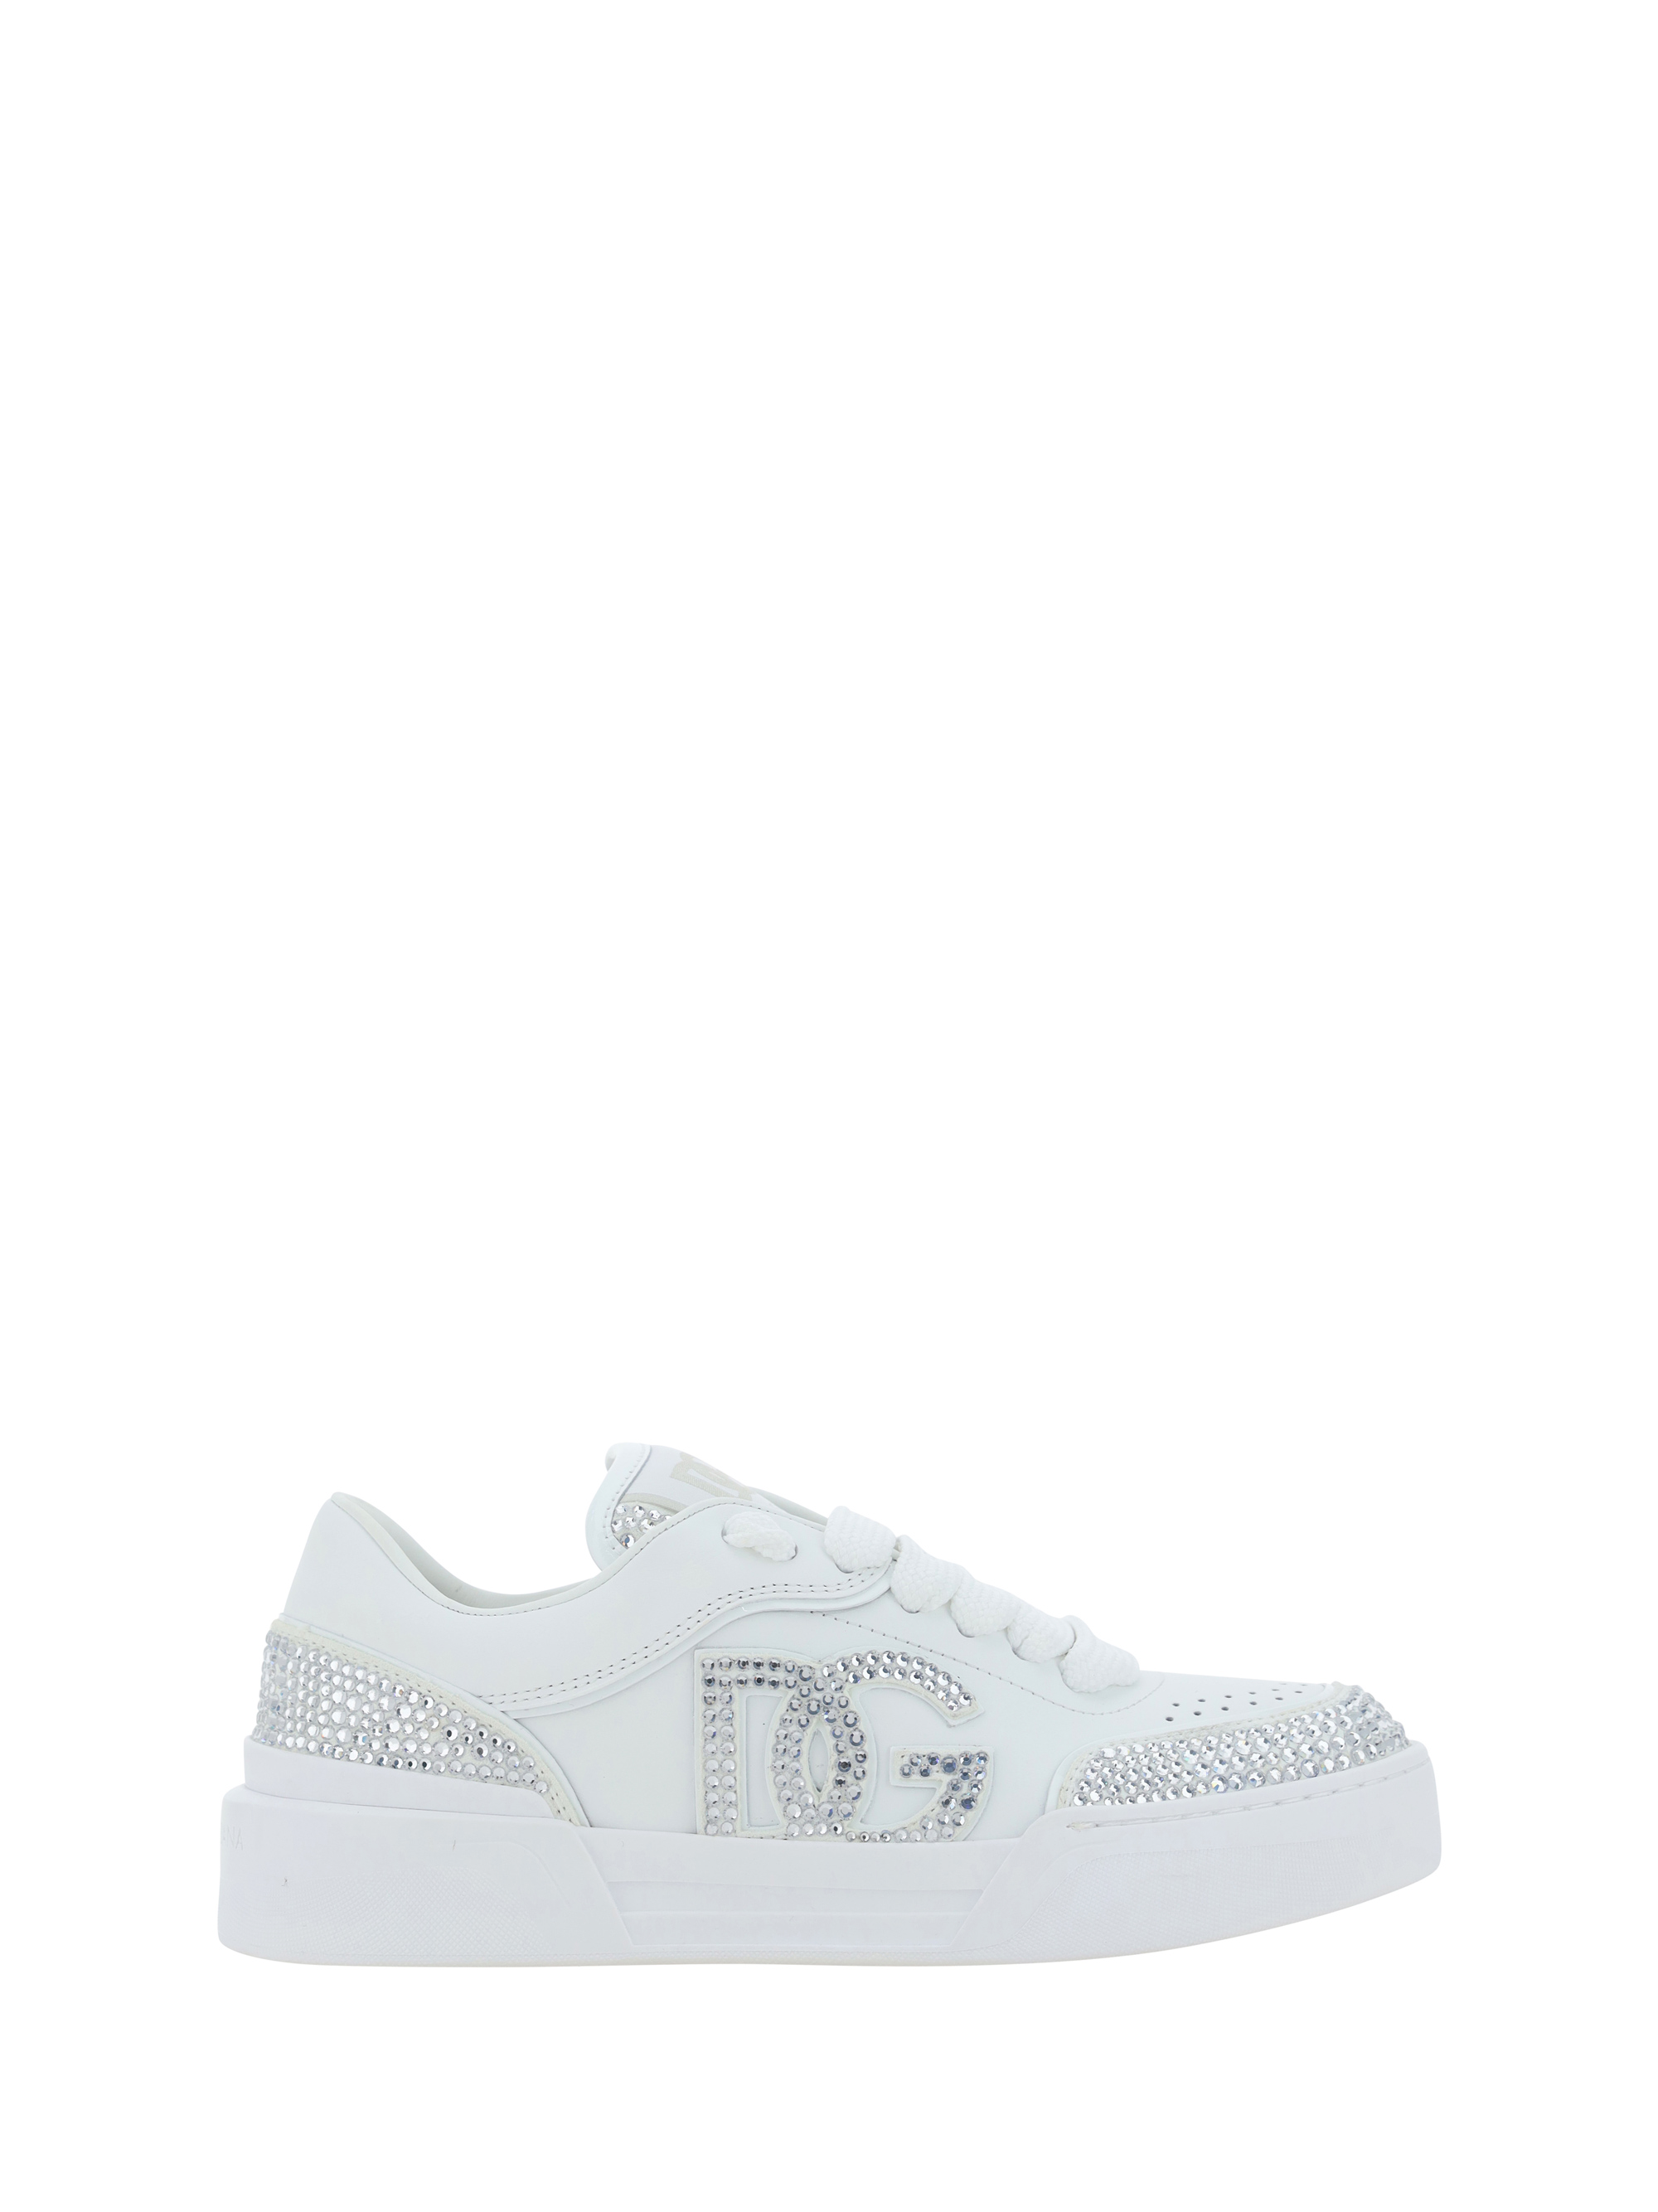 DOLCE & GABBANA NEW ROMA EMBELLISHED SNEAKERS